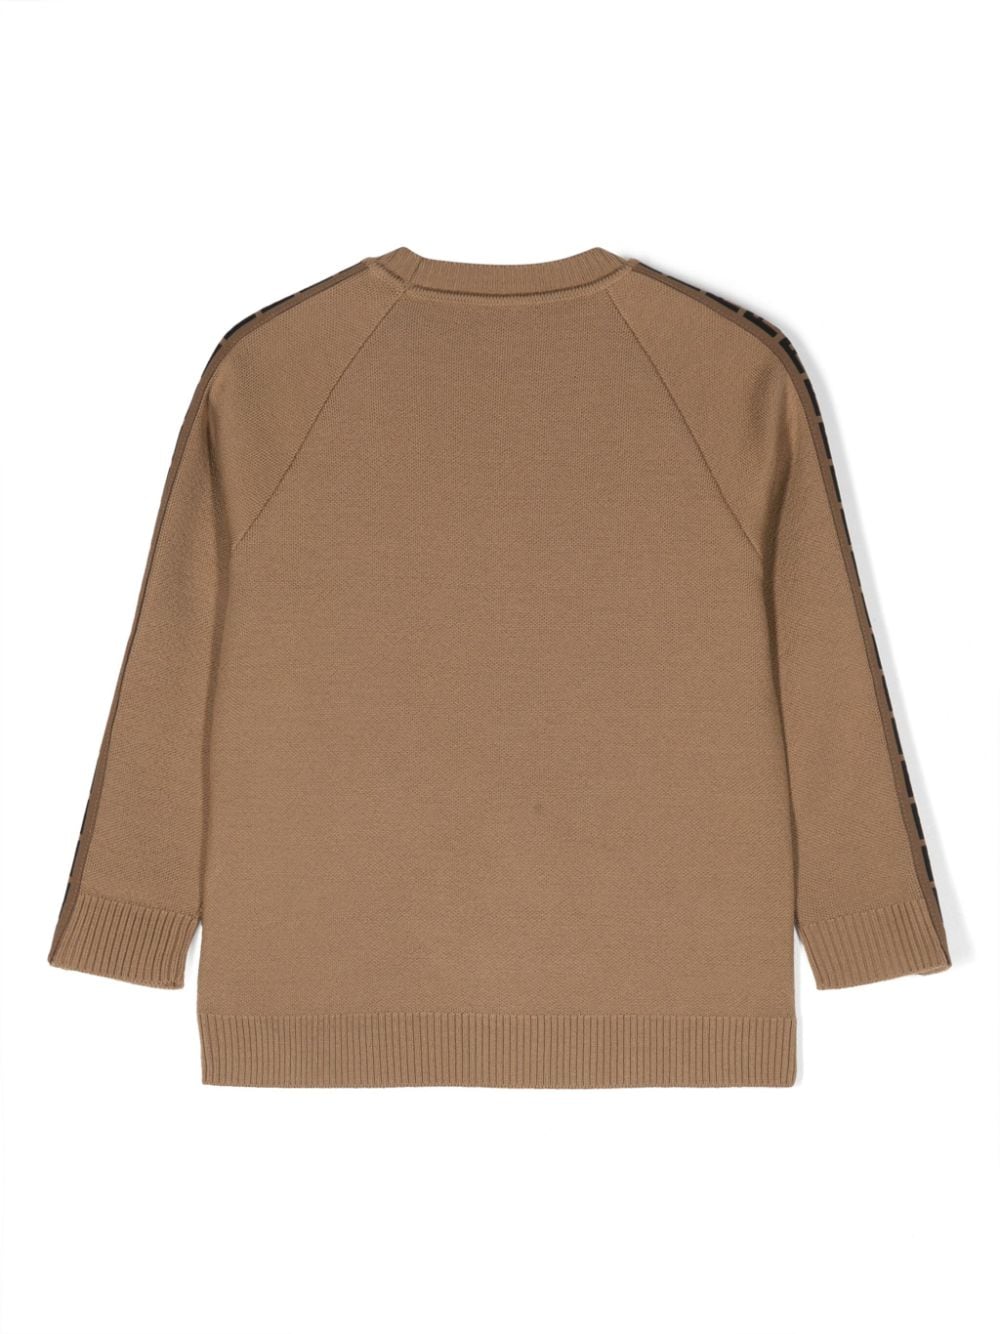 Brown wool sweater for children